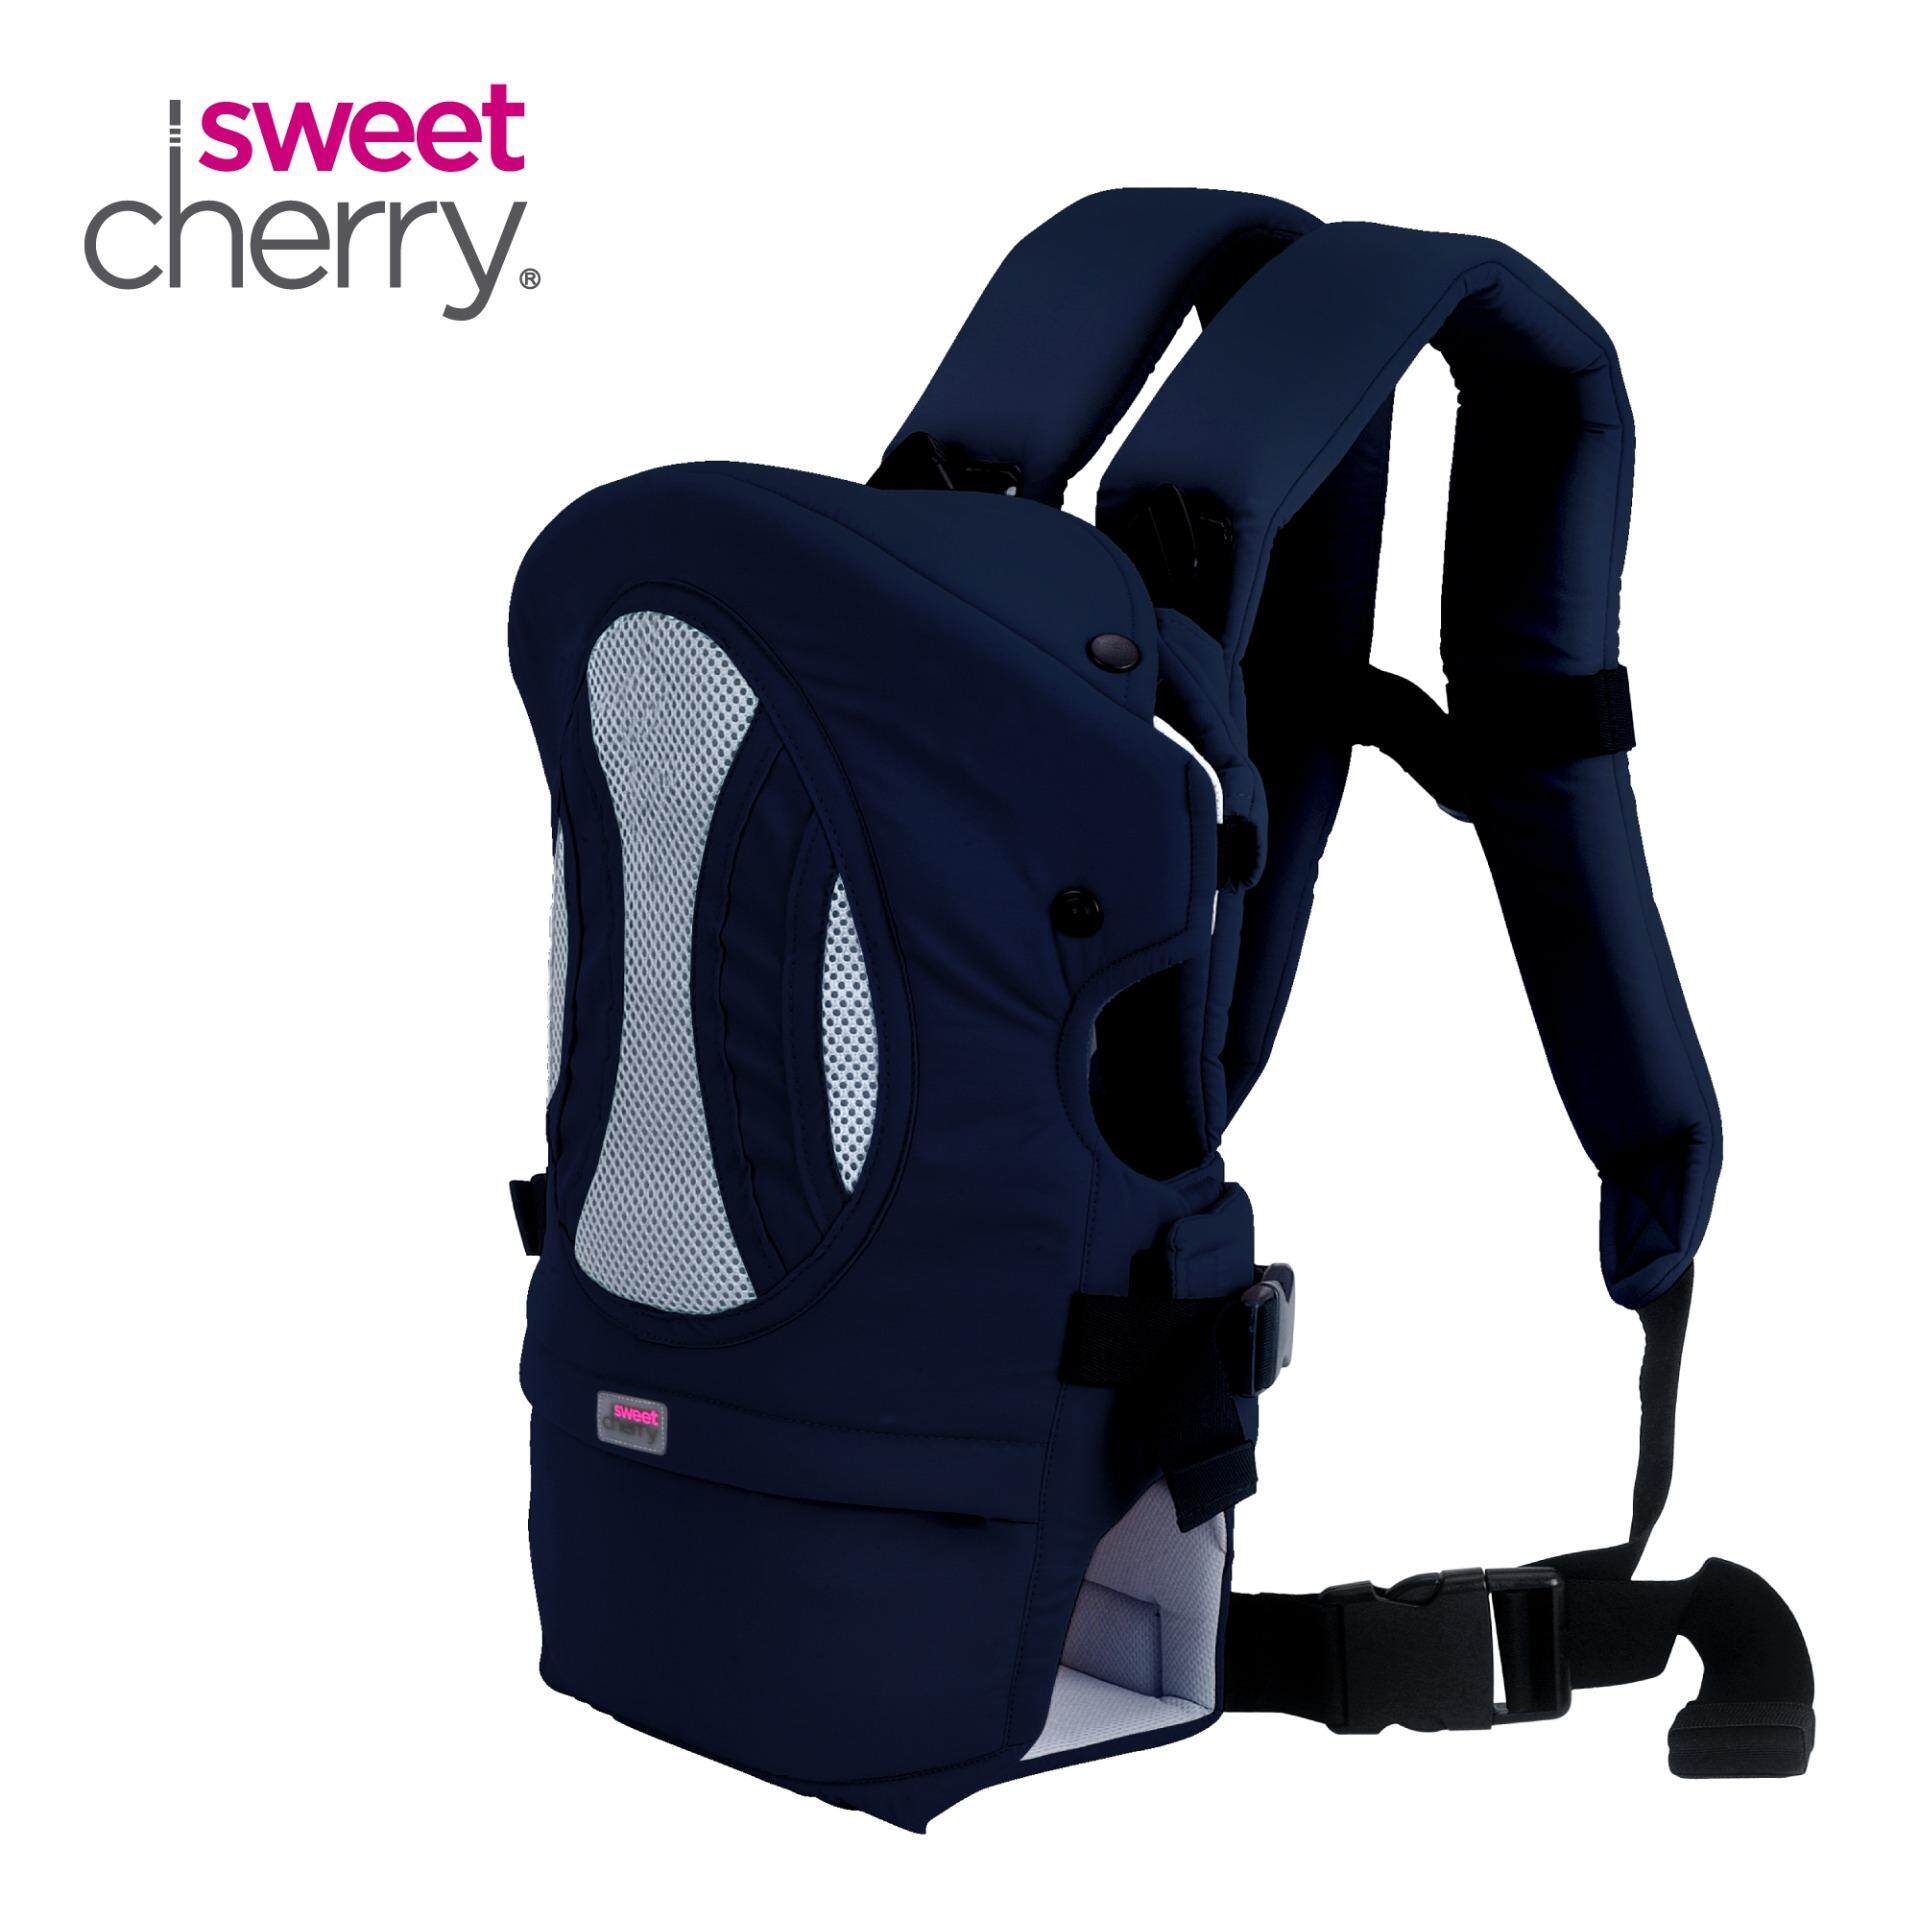 Sweet Cherry 4-in-1 Newborn carriers SC650 Oval Carriers (Navy)